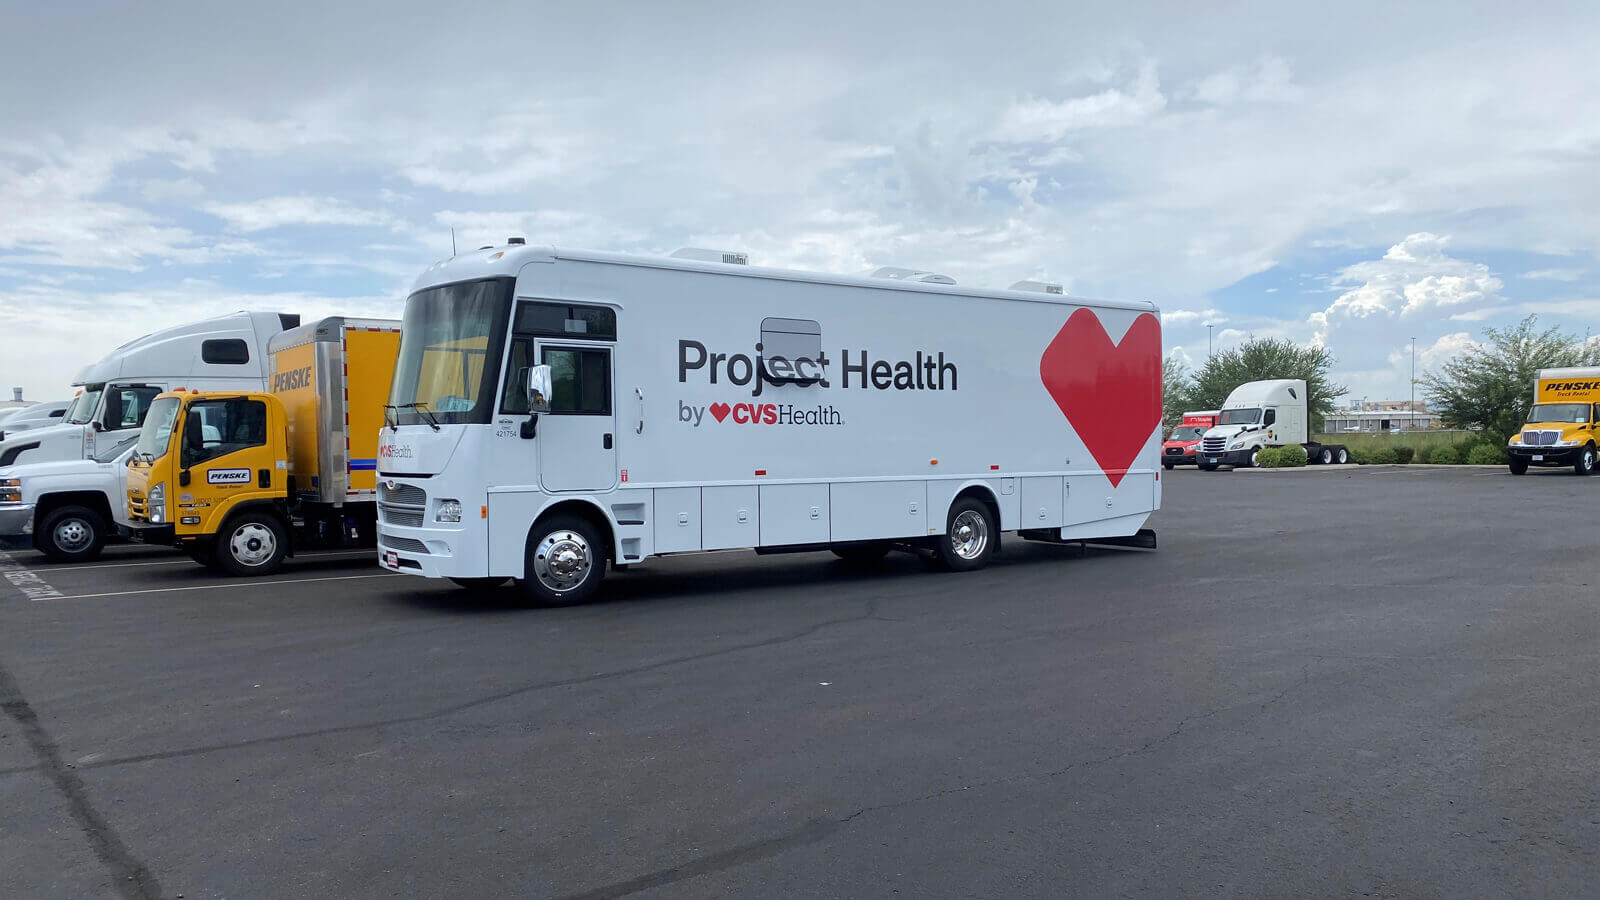 A Project Health screening bus parked in a lot.